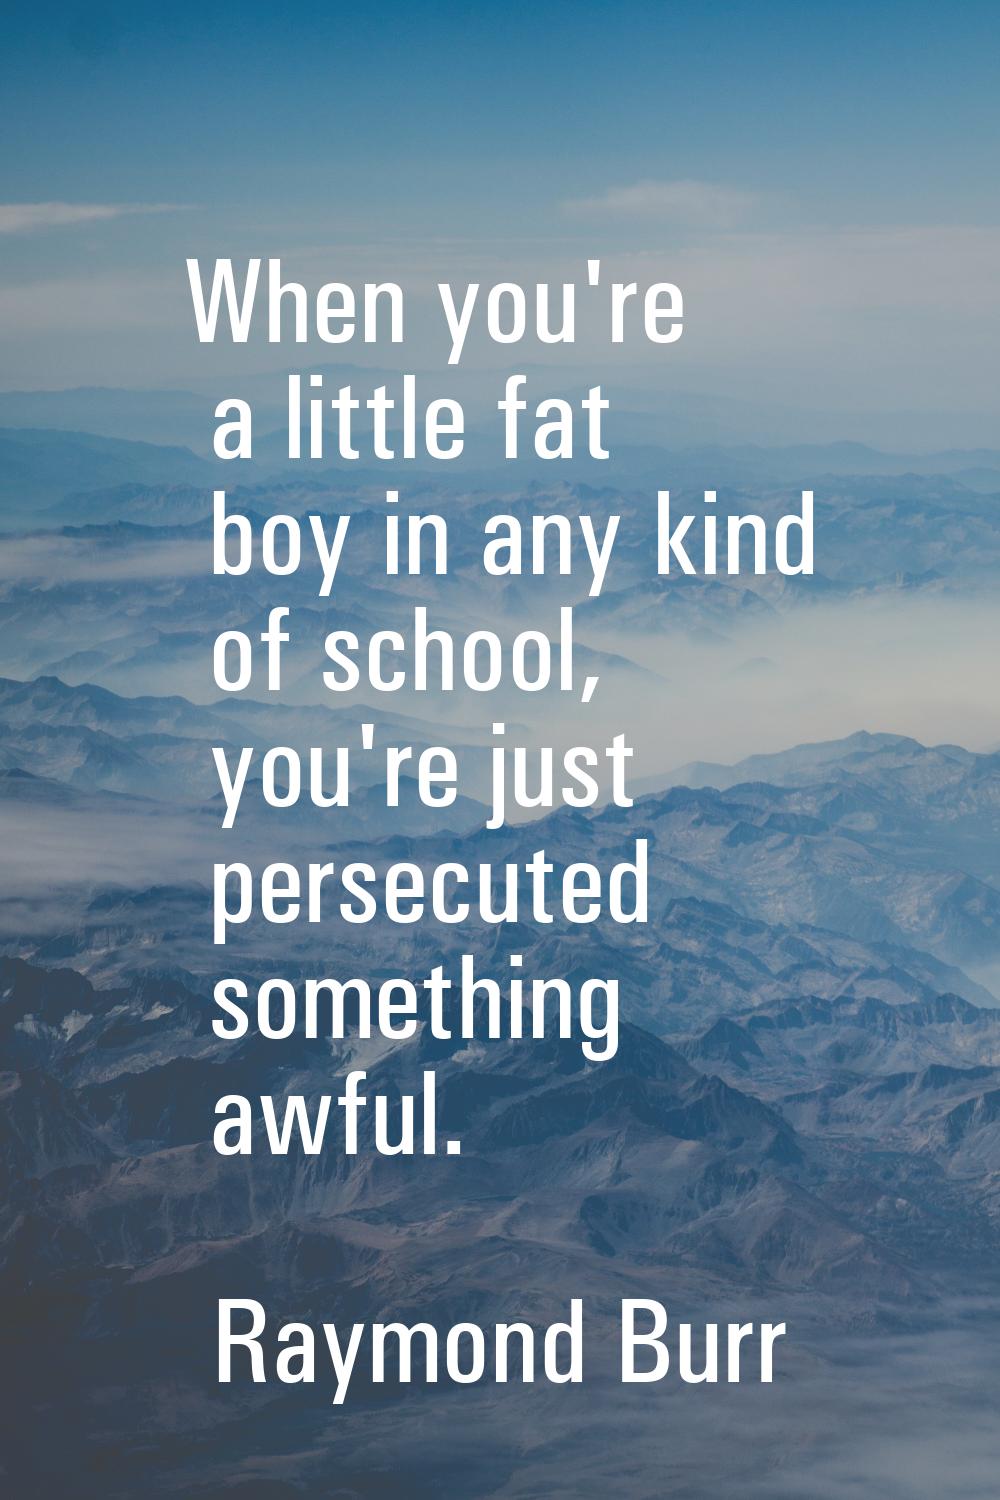 When you're a little fat boy in any kind of school, you're just persecuted something awful.